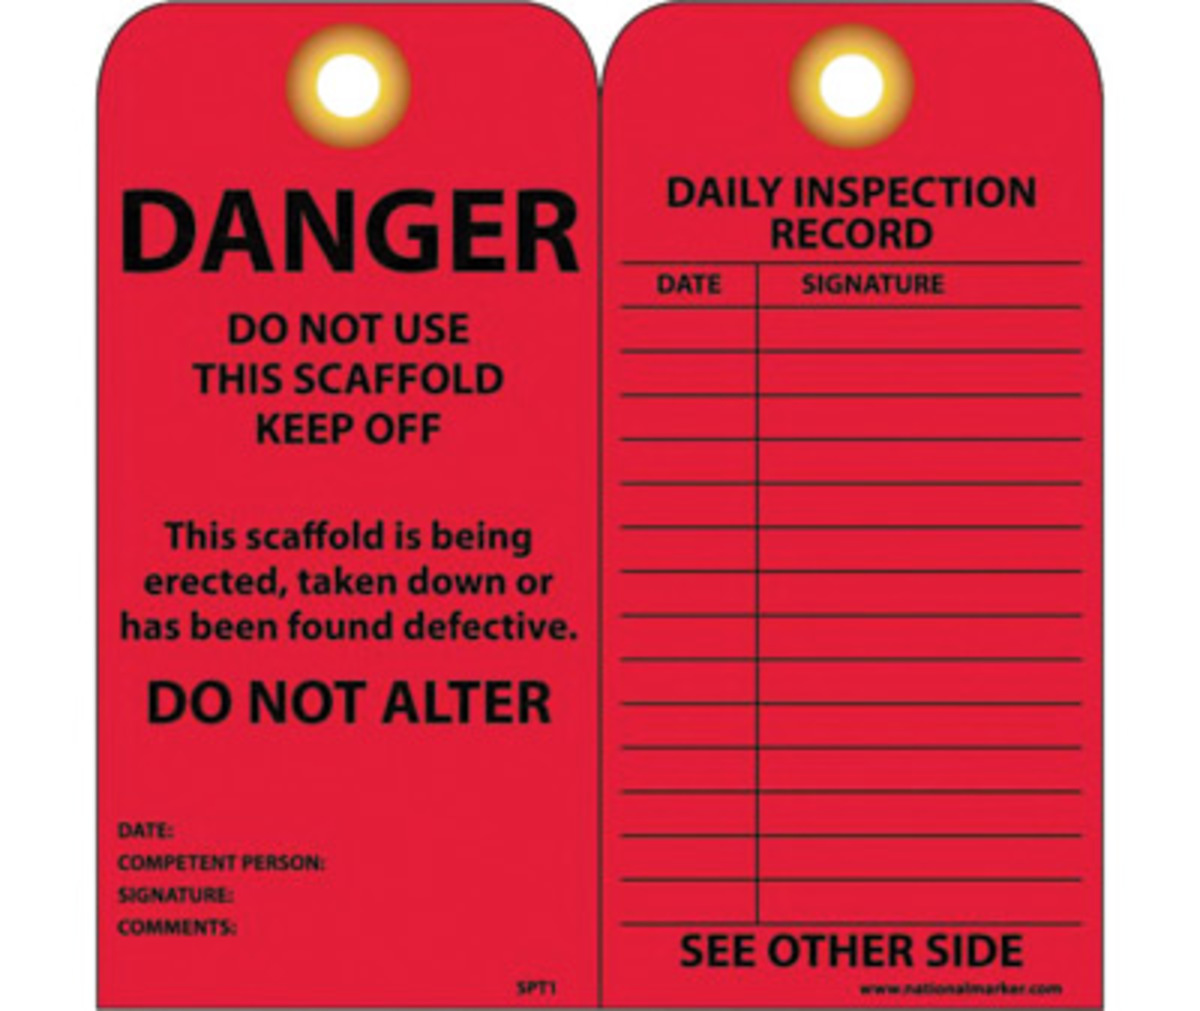 Airgas - N23SPT1 - AccuformNMC™ 6 X 3 Black/Red Card Stock (25 Per Pack)  DANGER DO NOT USE THIS SCAFFOLD